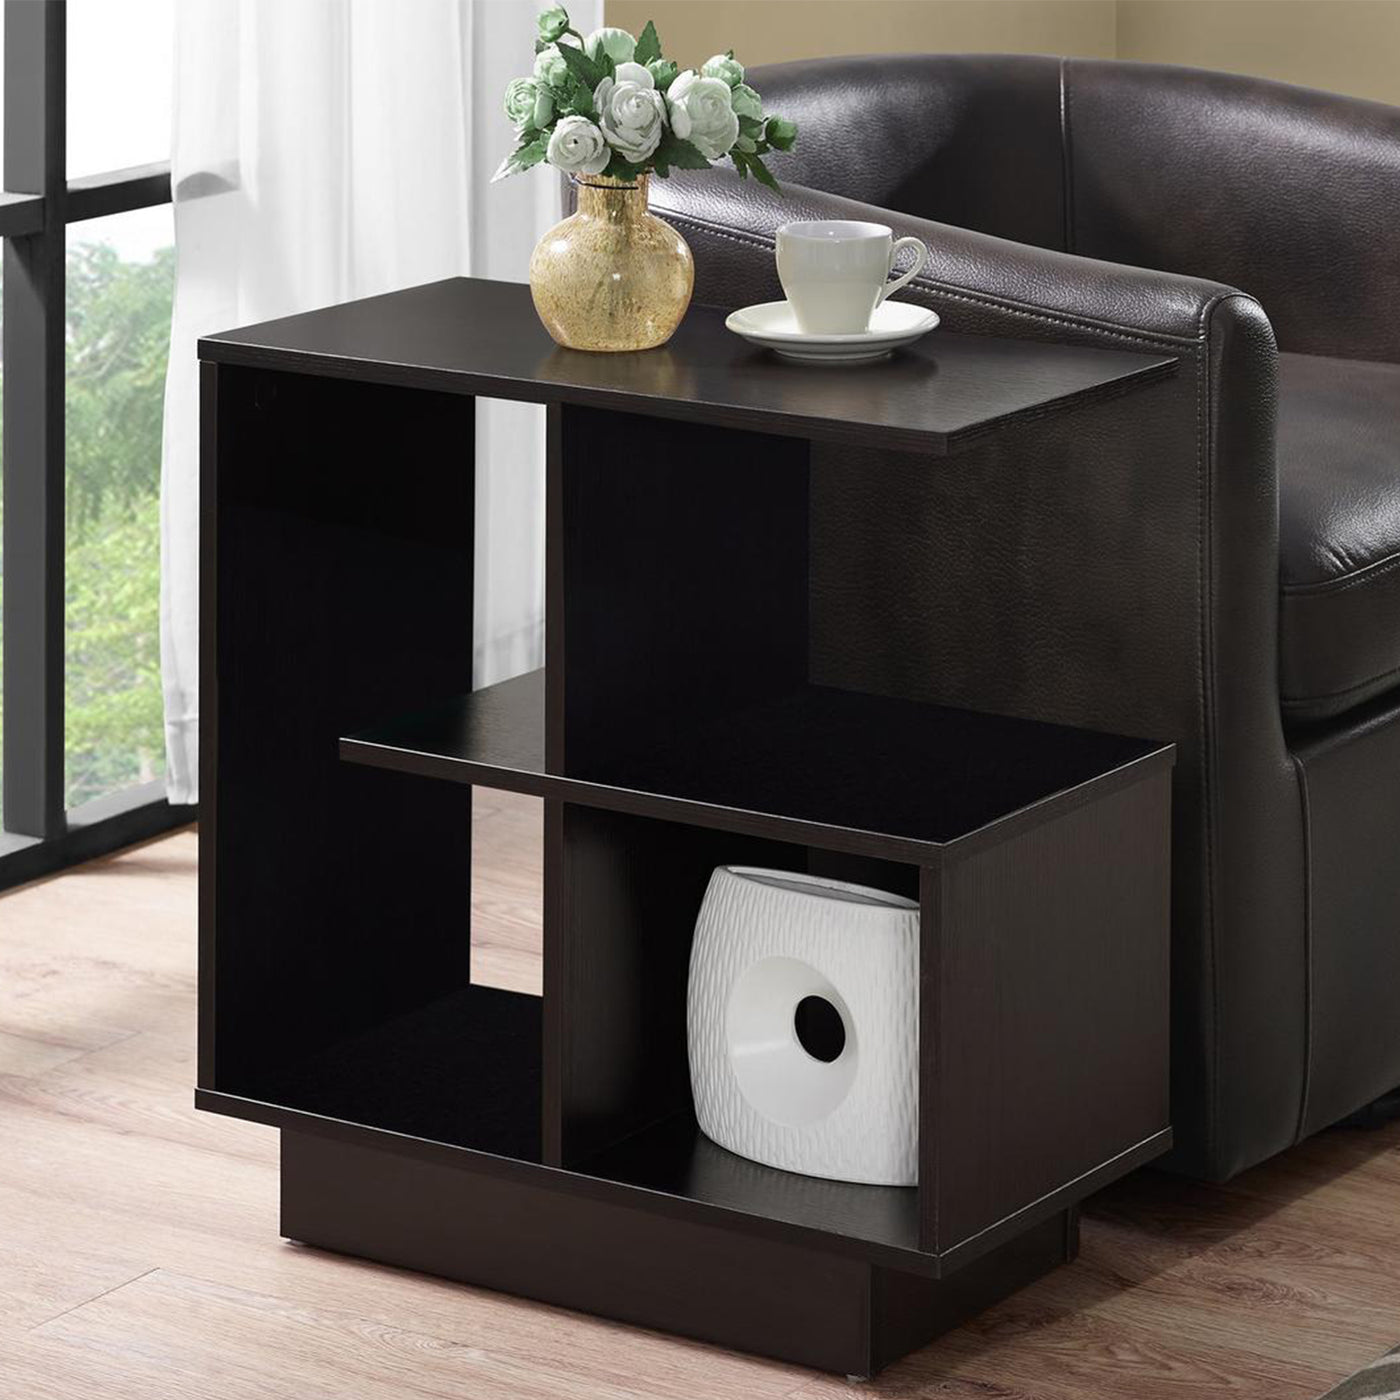 24" Espresso End Table With Four Shelves